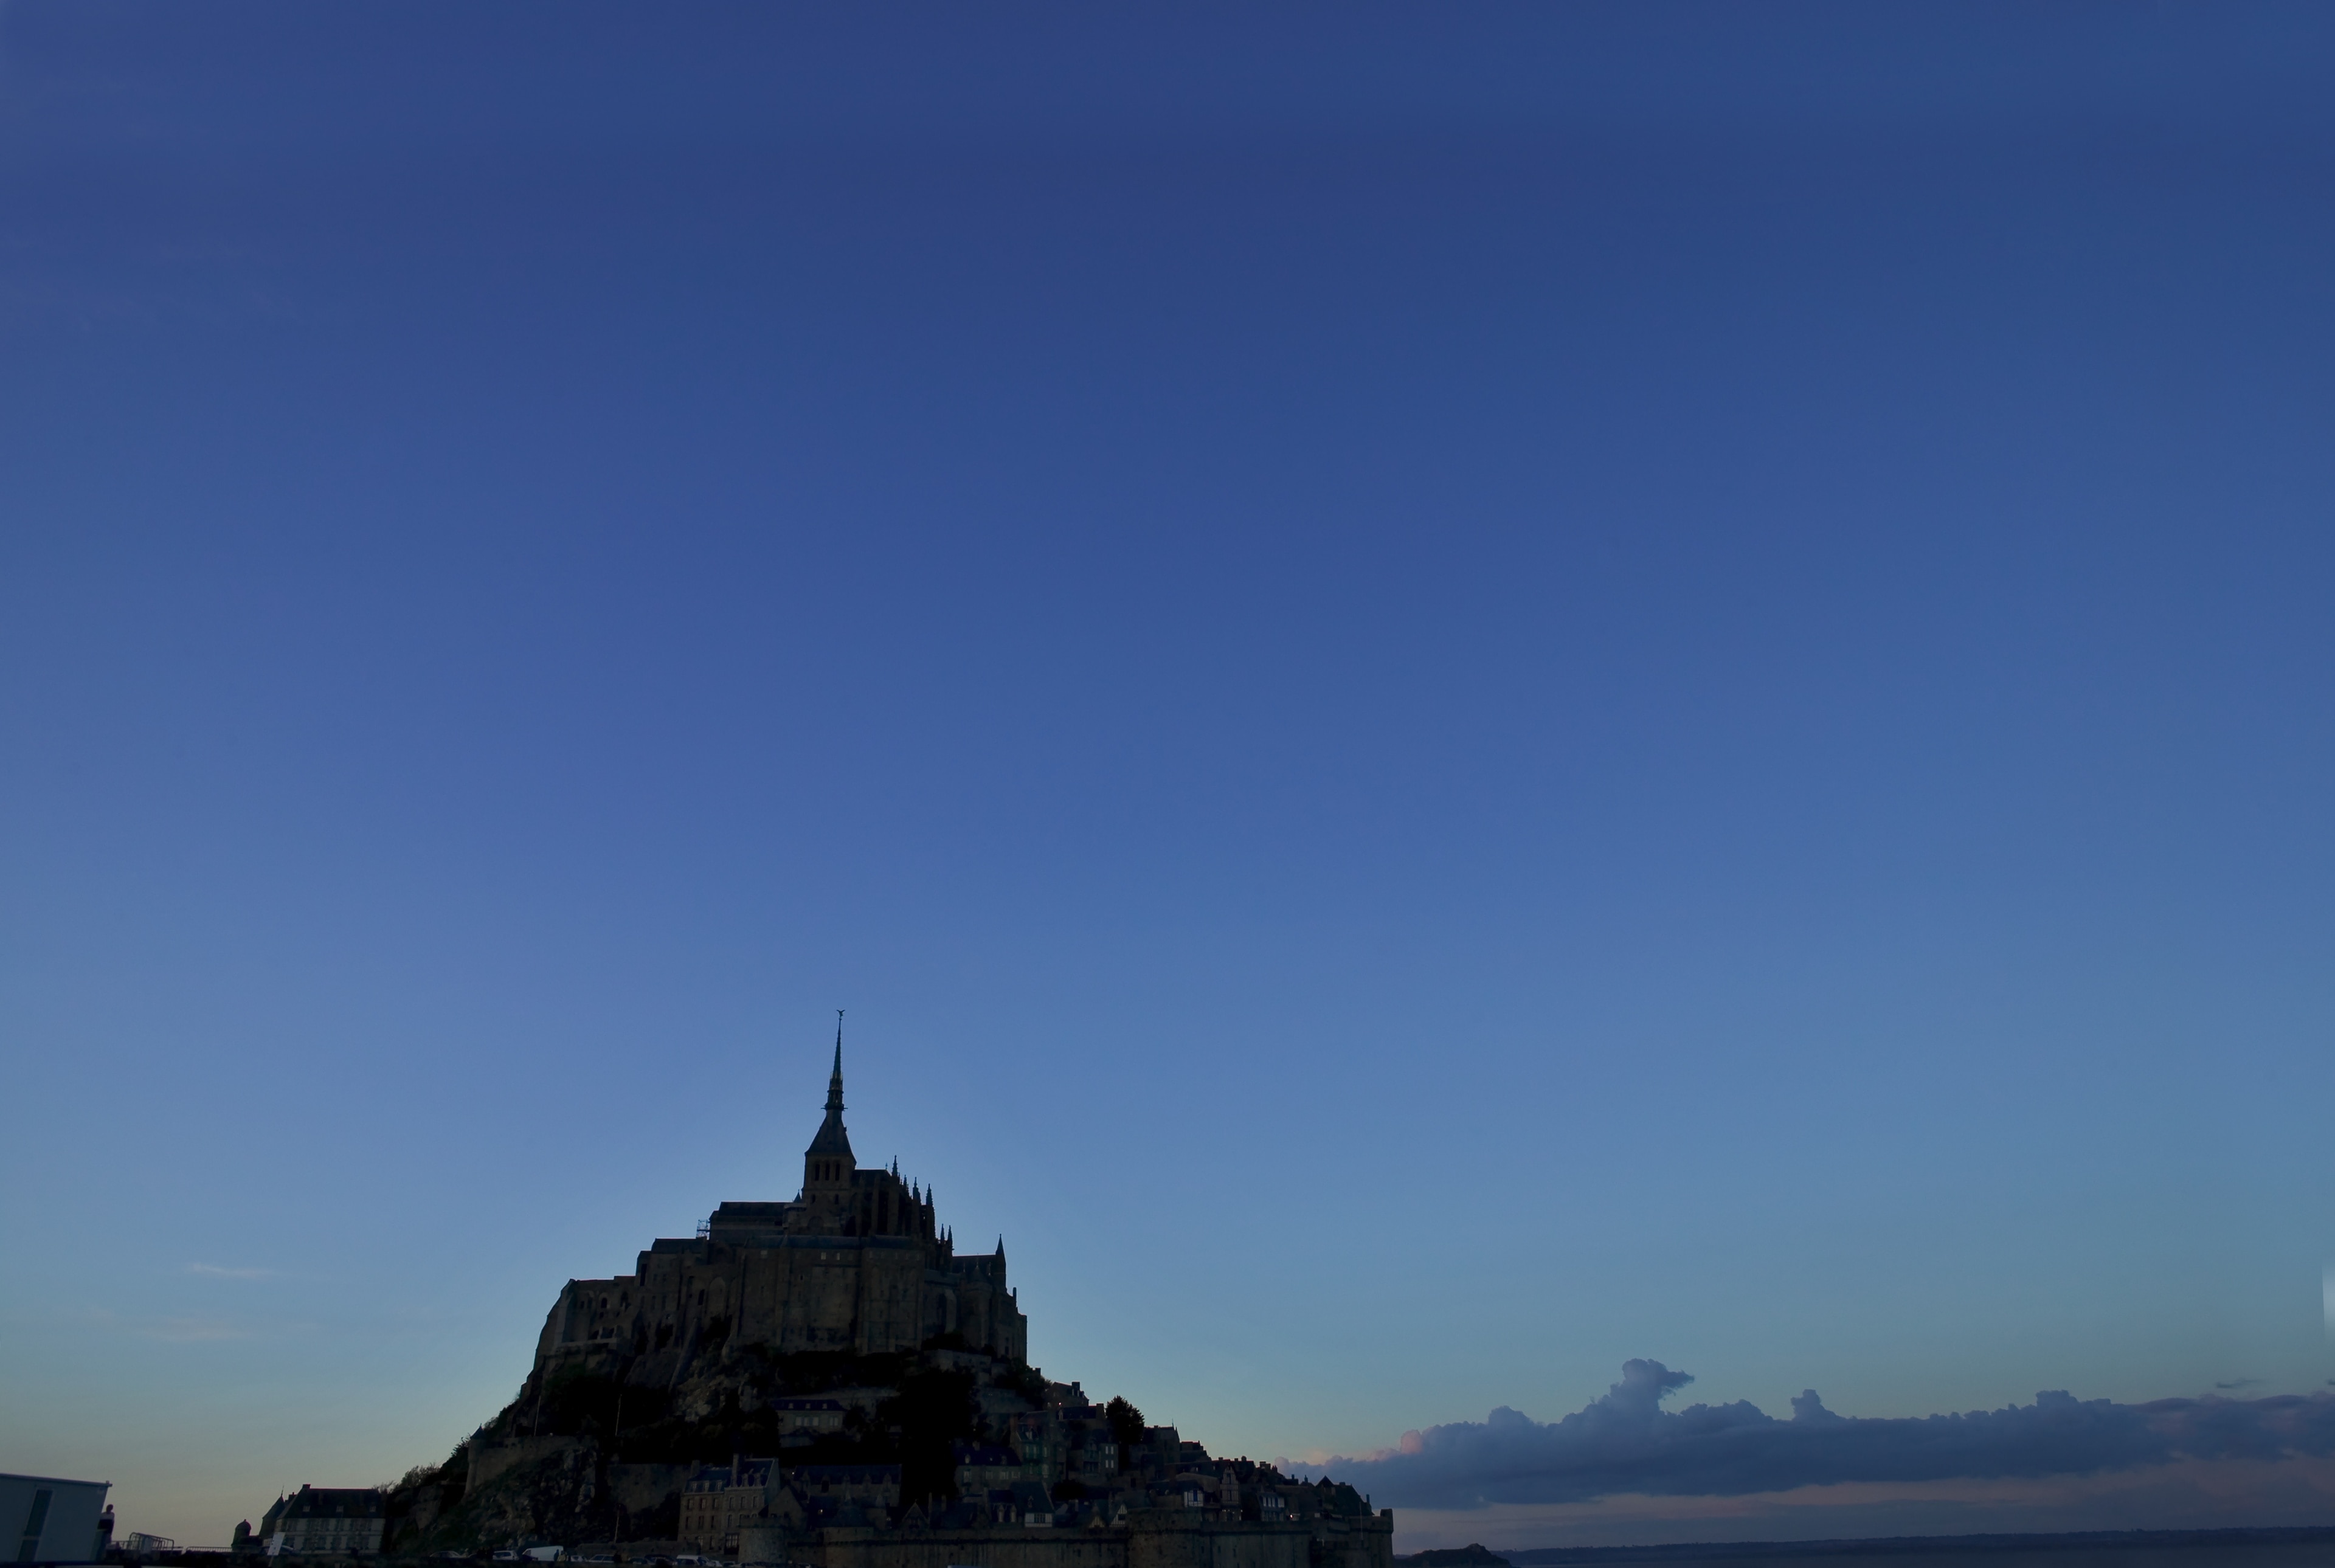 A Guide to the Best Things to do in Mont Saint Michel